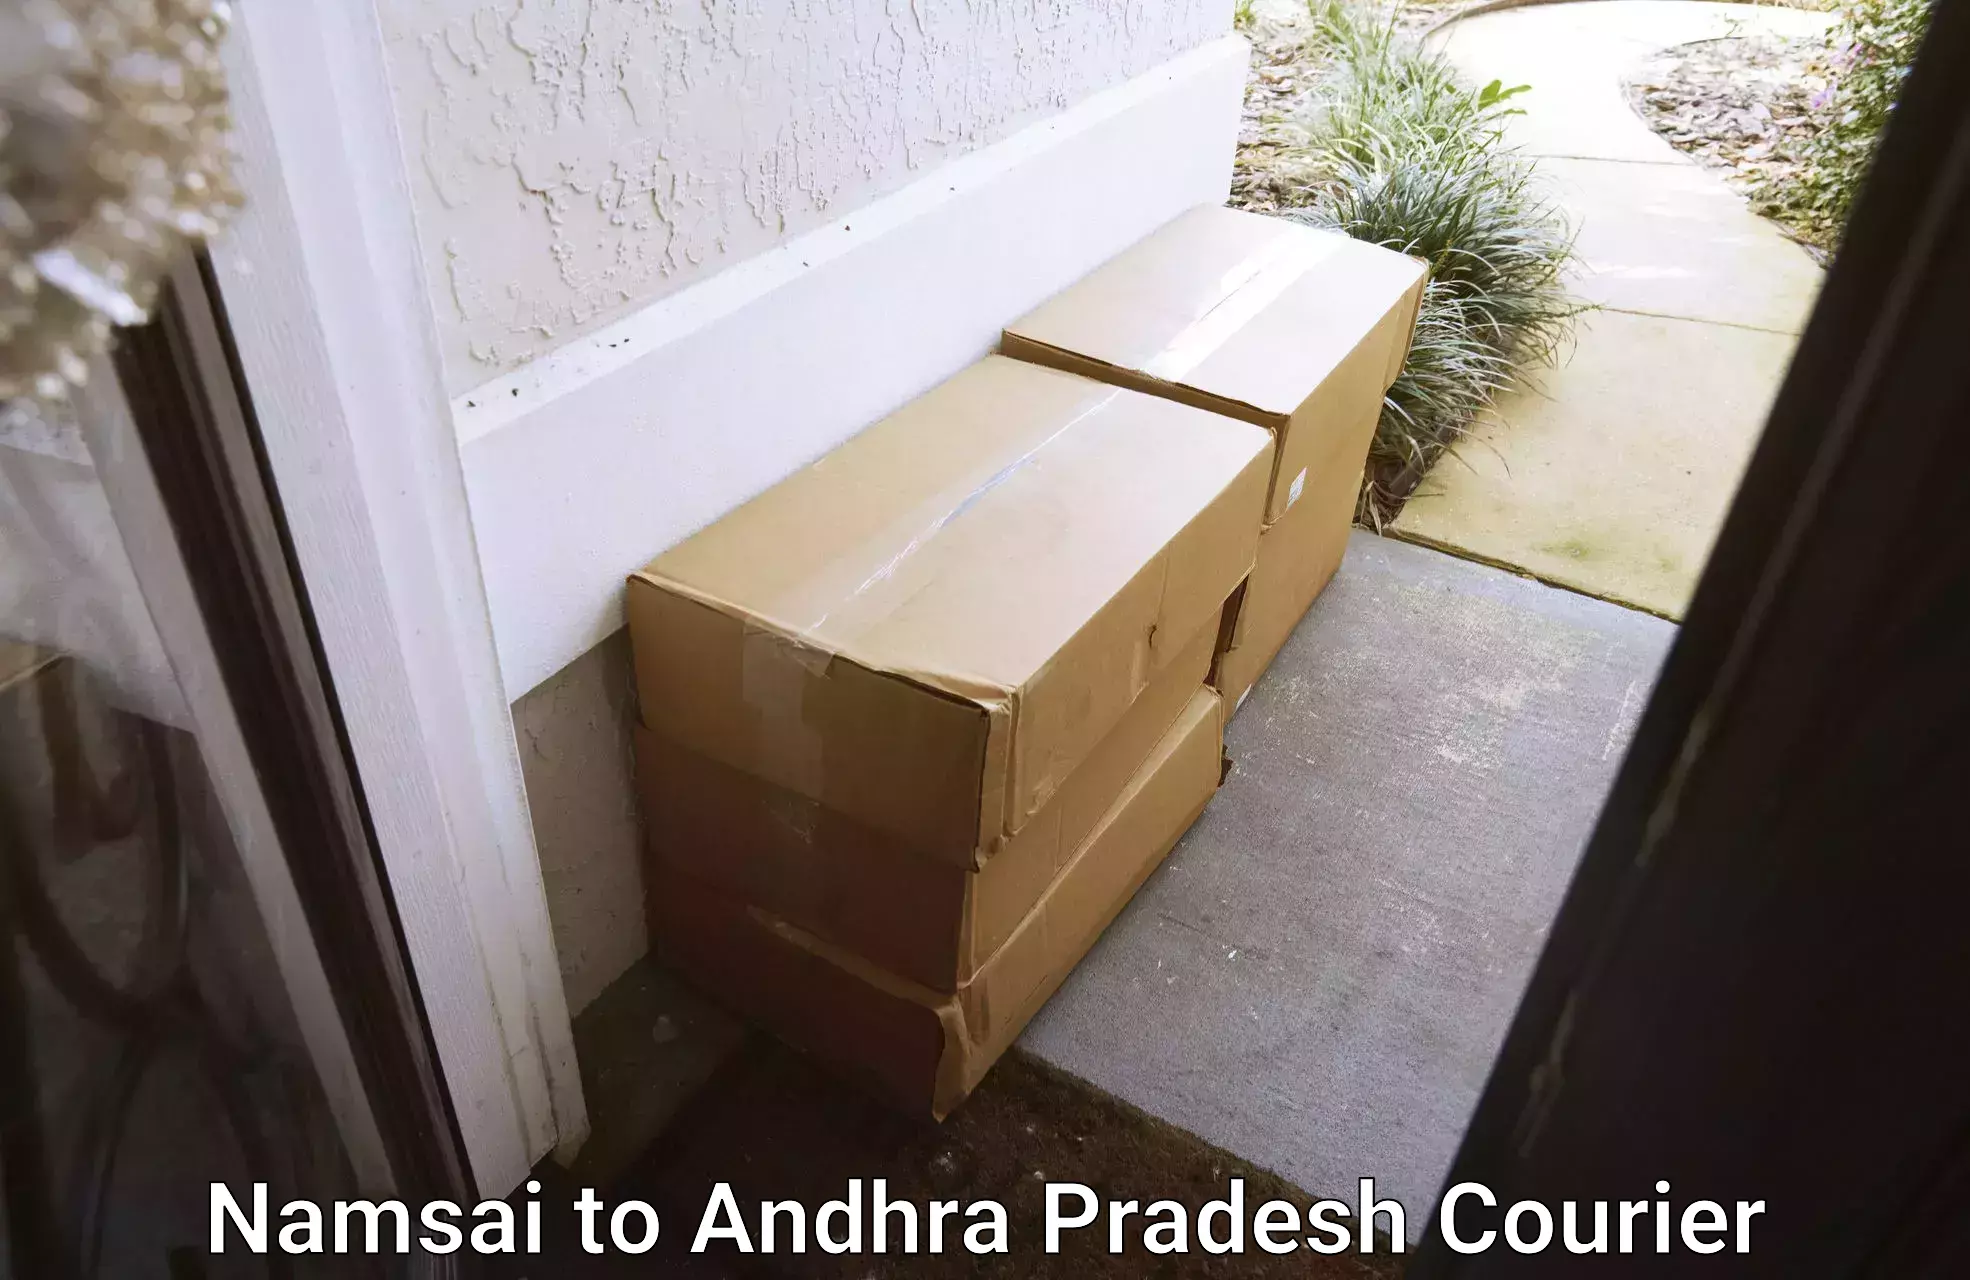 Round-the-clock parcel delivery in Namsai to Andhra Pradesh